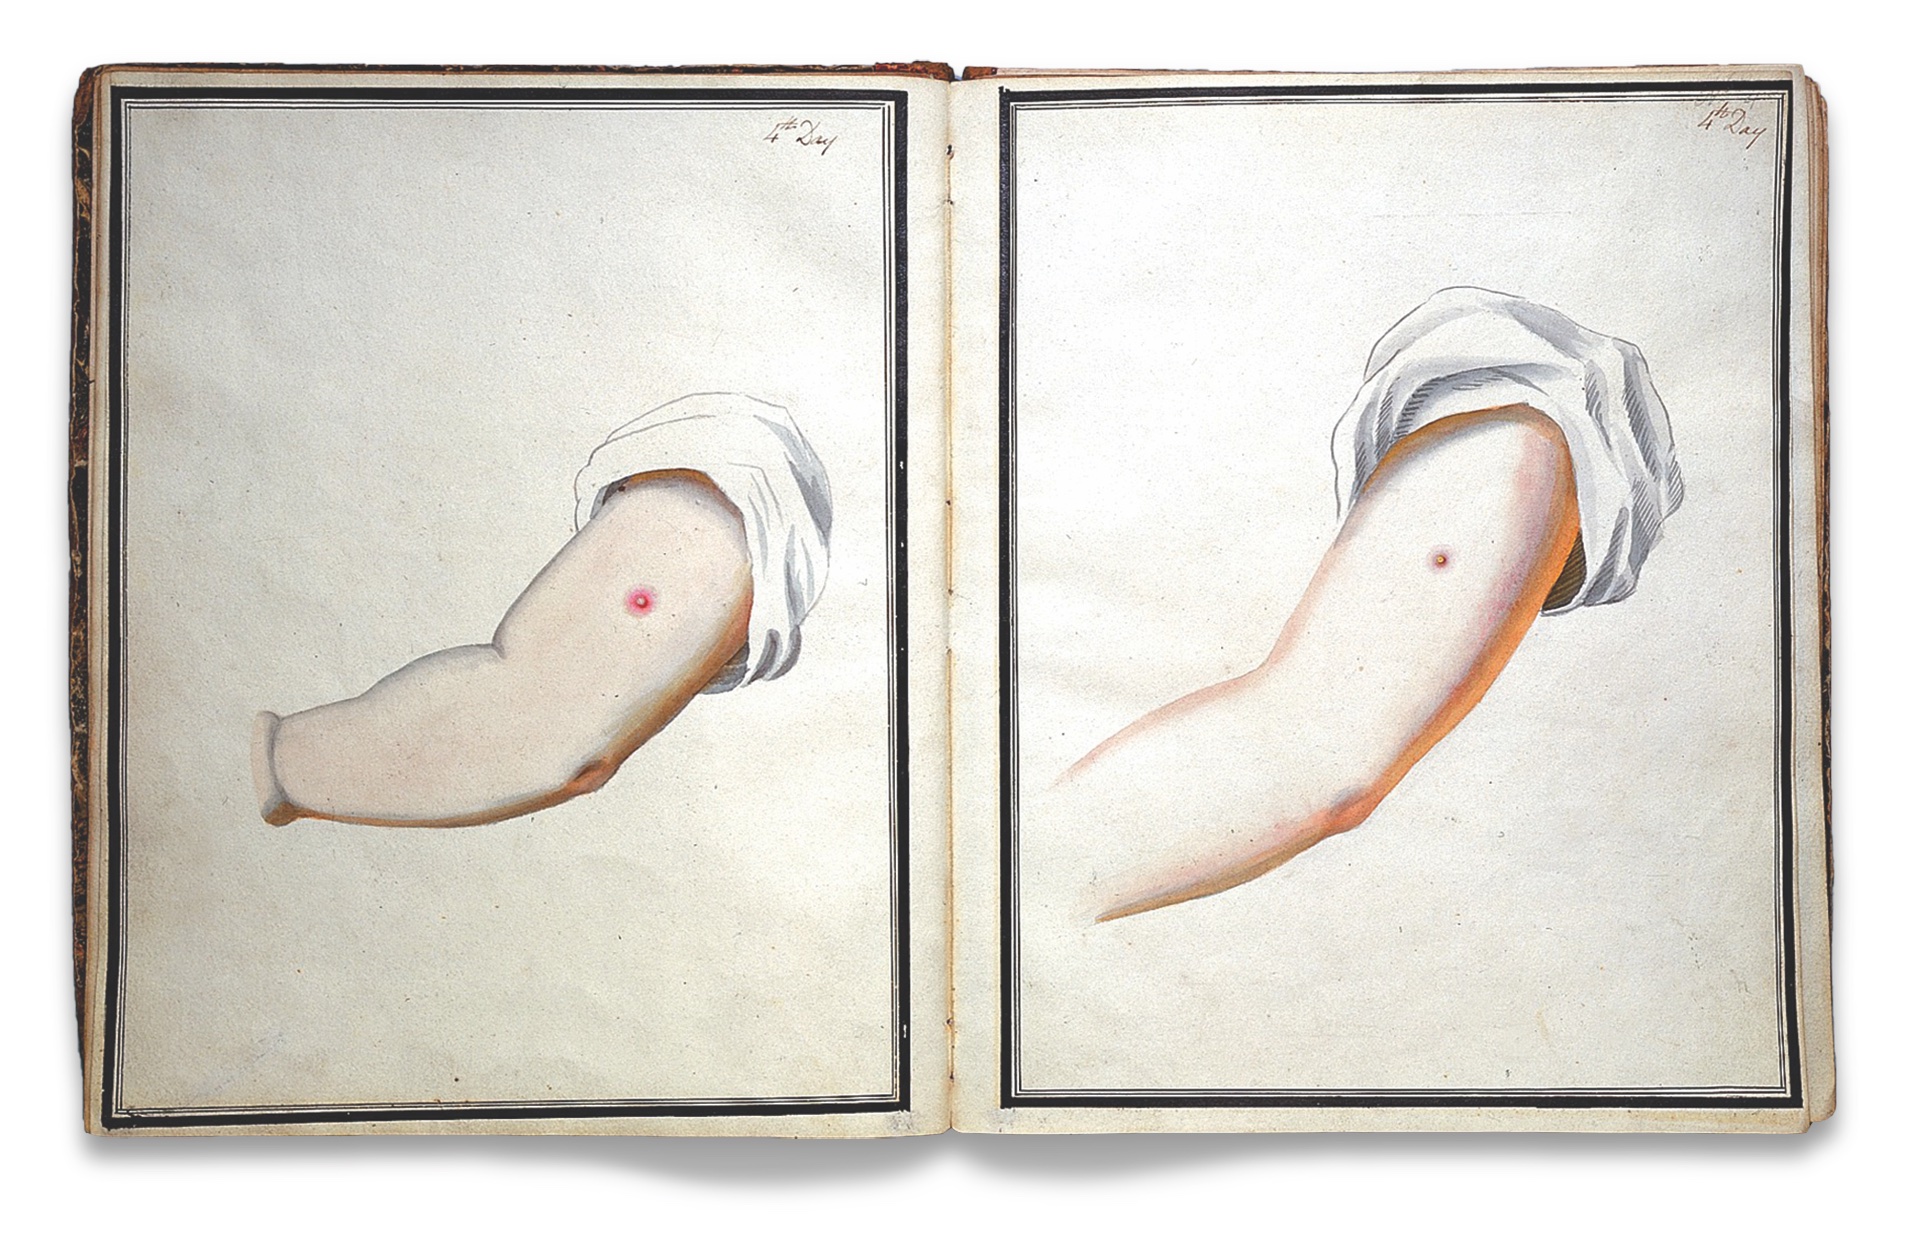 These 19th-century watercolor drawings portray the marked similarity between a smallpox inoculation on the left (variolation) and a cowpox inoculation (vaccination) on the right. (Wellcome Images) 